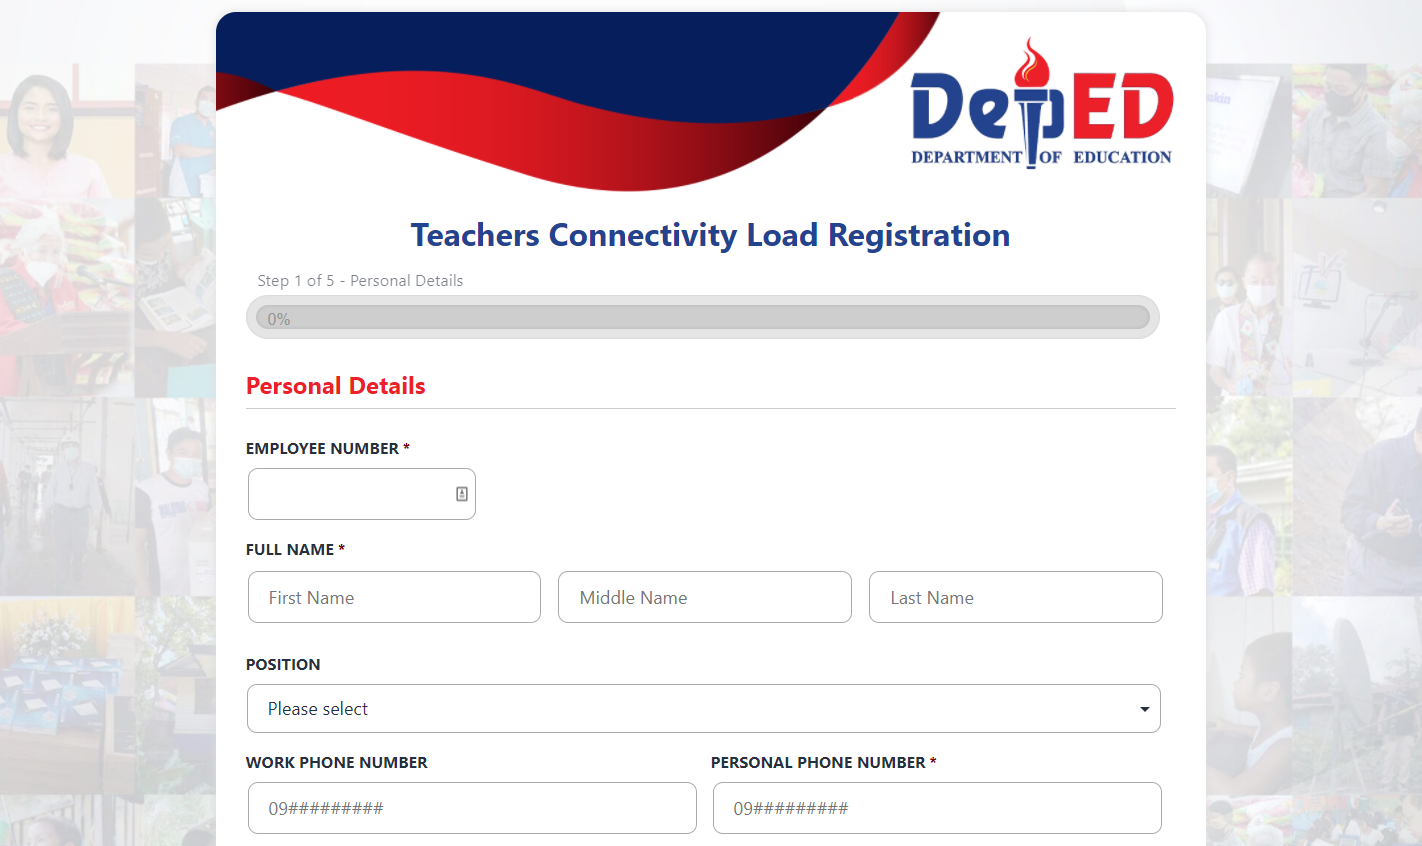 DepEd Distributes SIM Cards Loaded with 34GB Monthly Load to Teachers